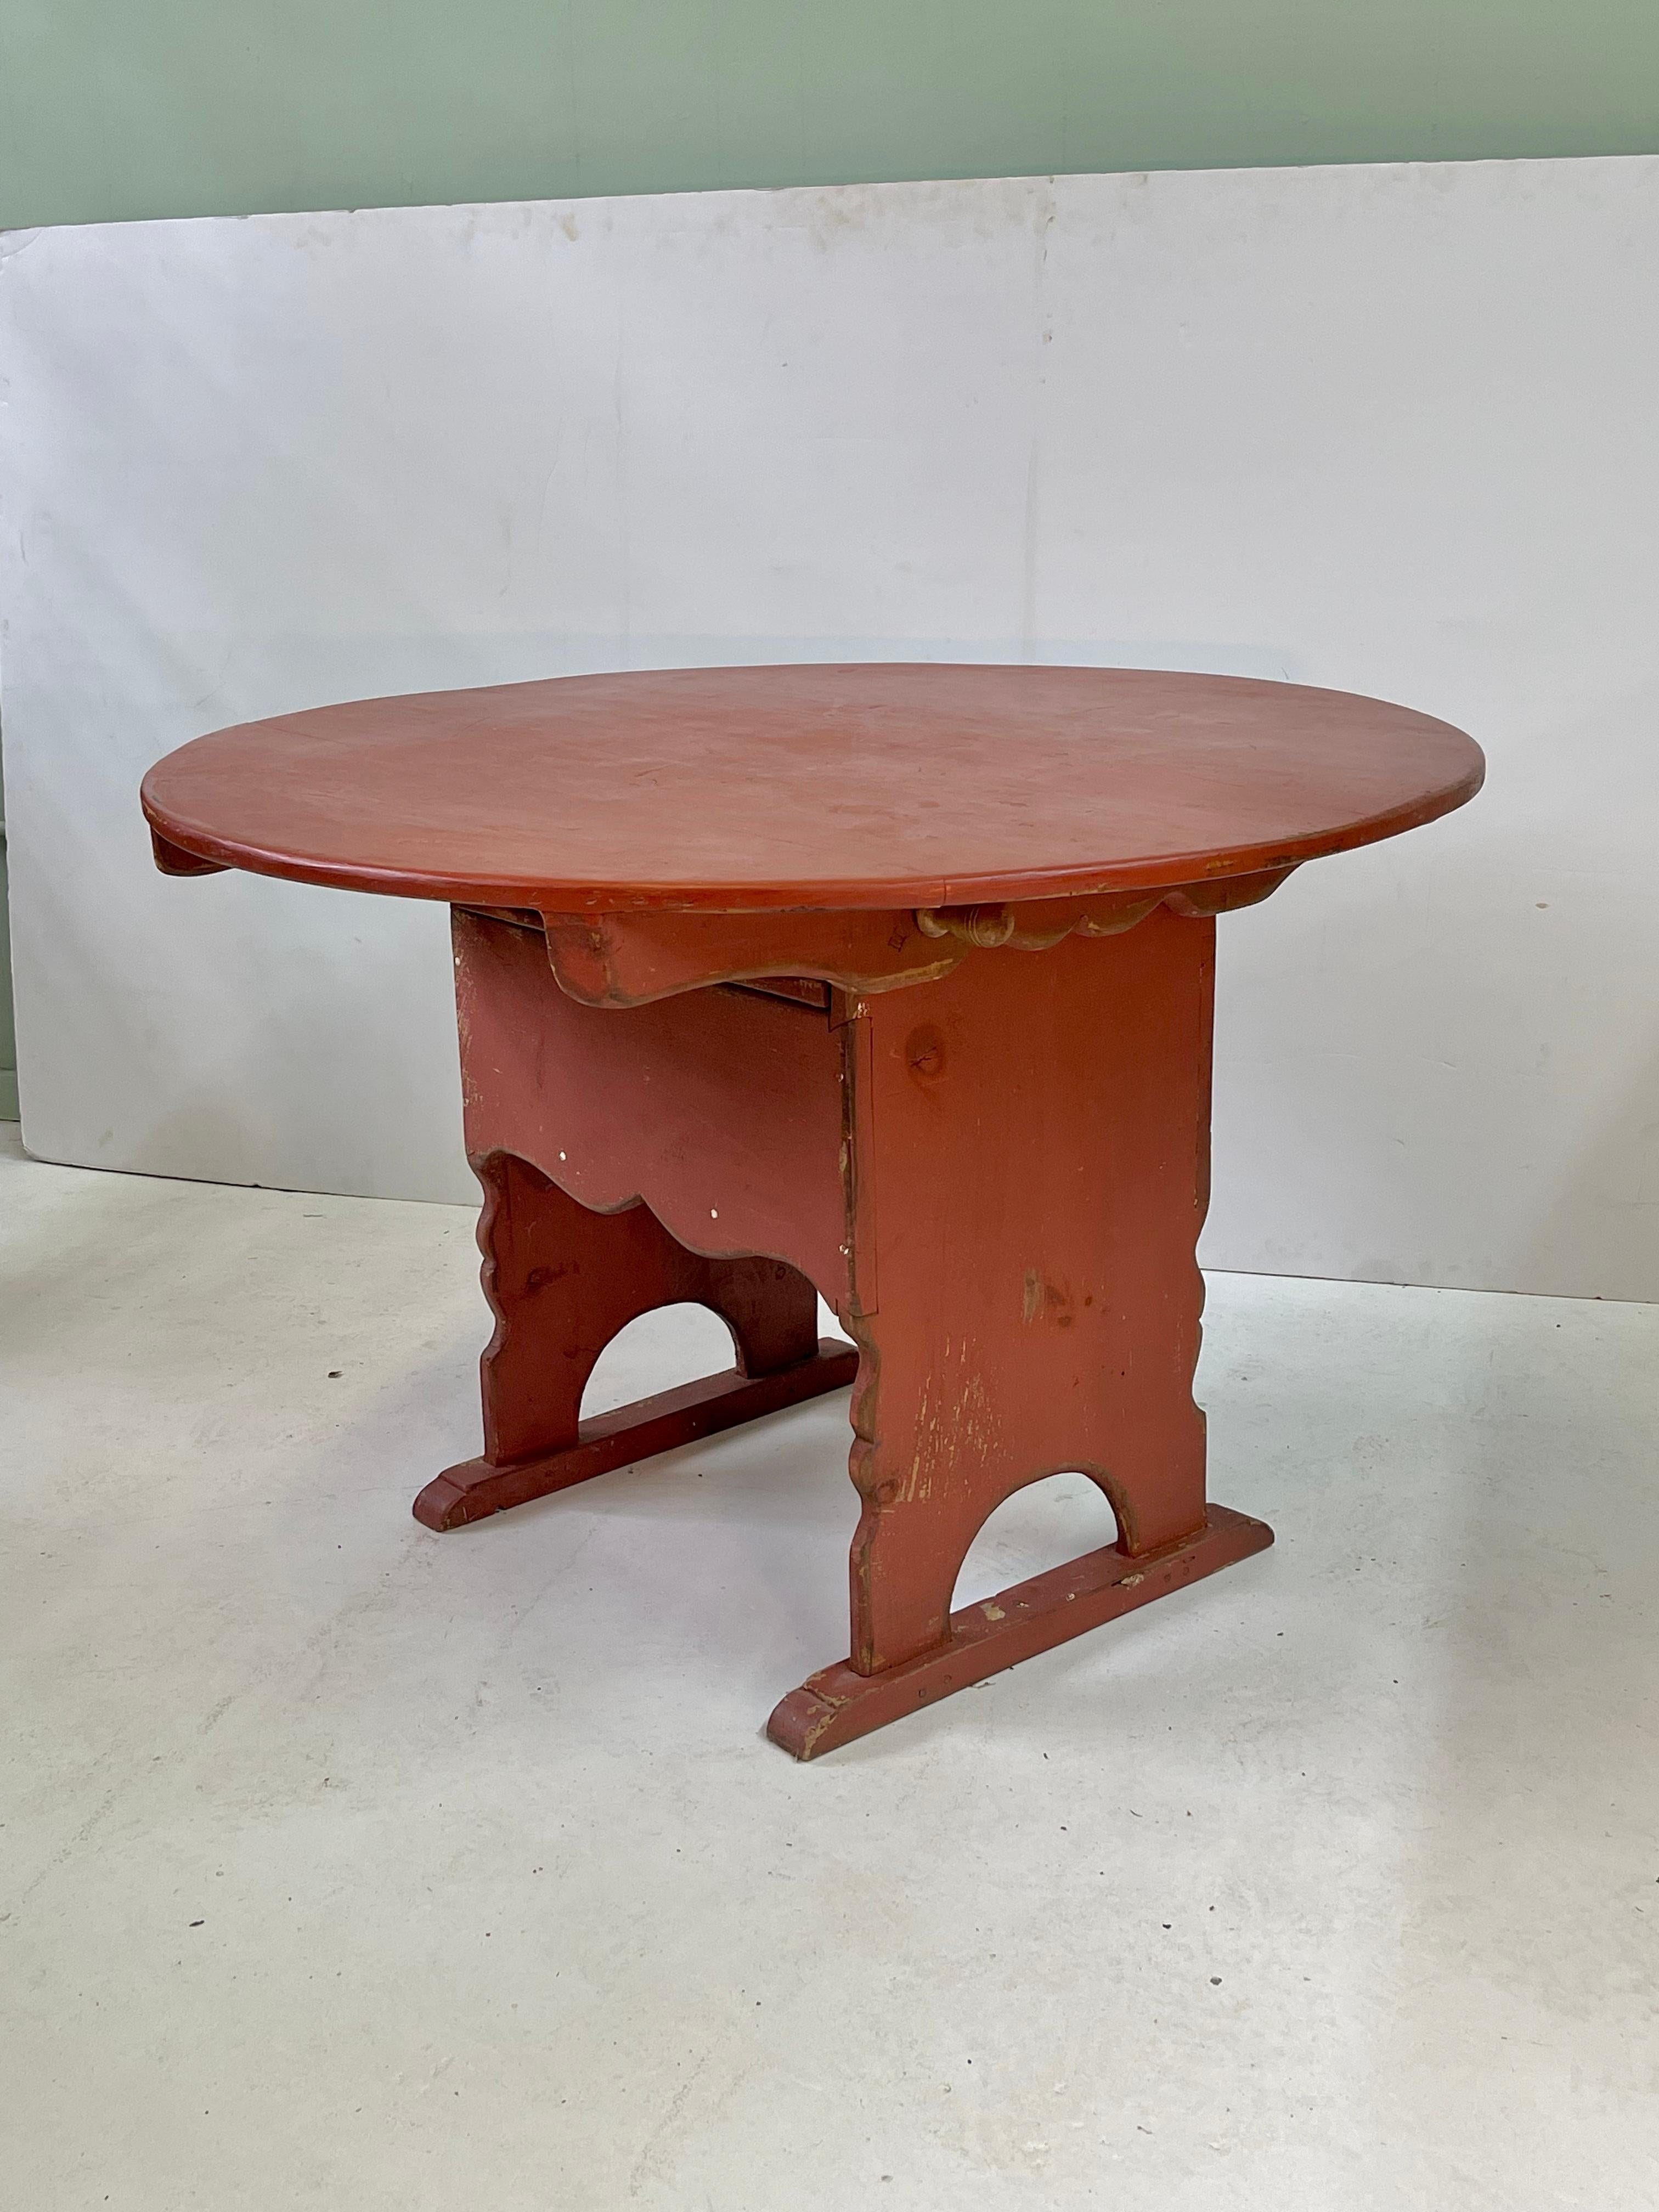 19th Century French Wine Tasting Trestle Table + Metamorphic Chair